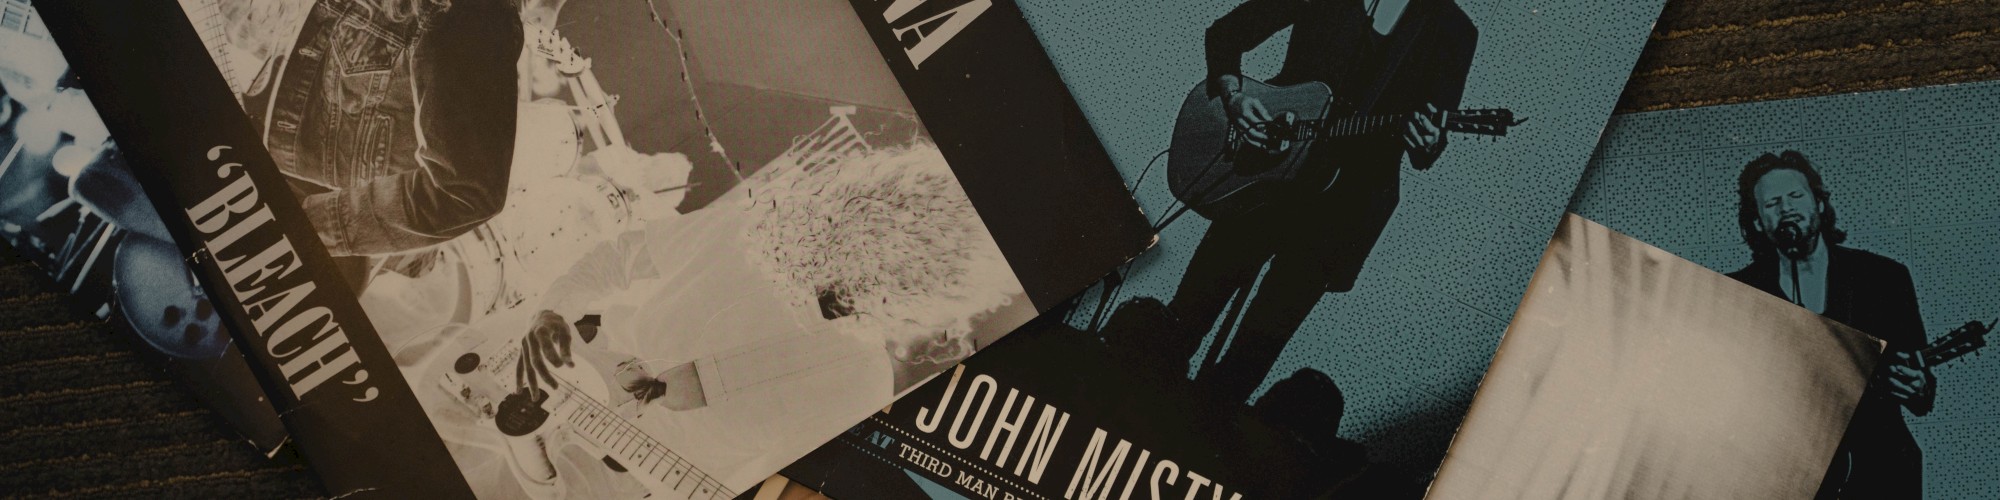 This image shows several vinyl record sleeves, including ones from Nirvana and Father John Misty, arranged on a dark surface.